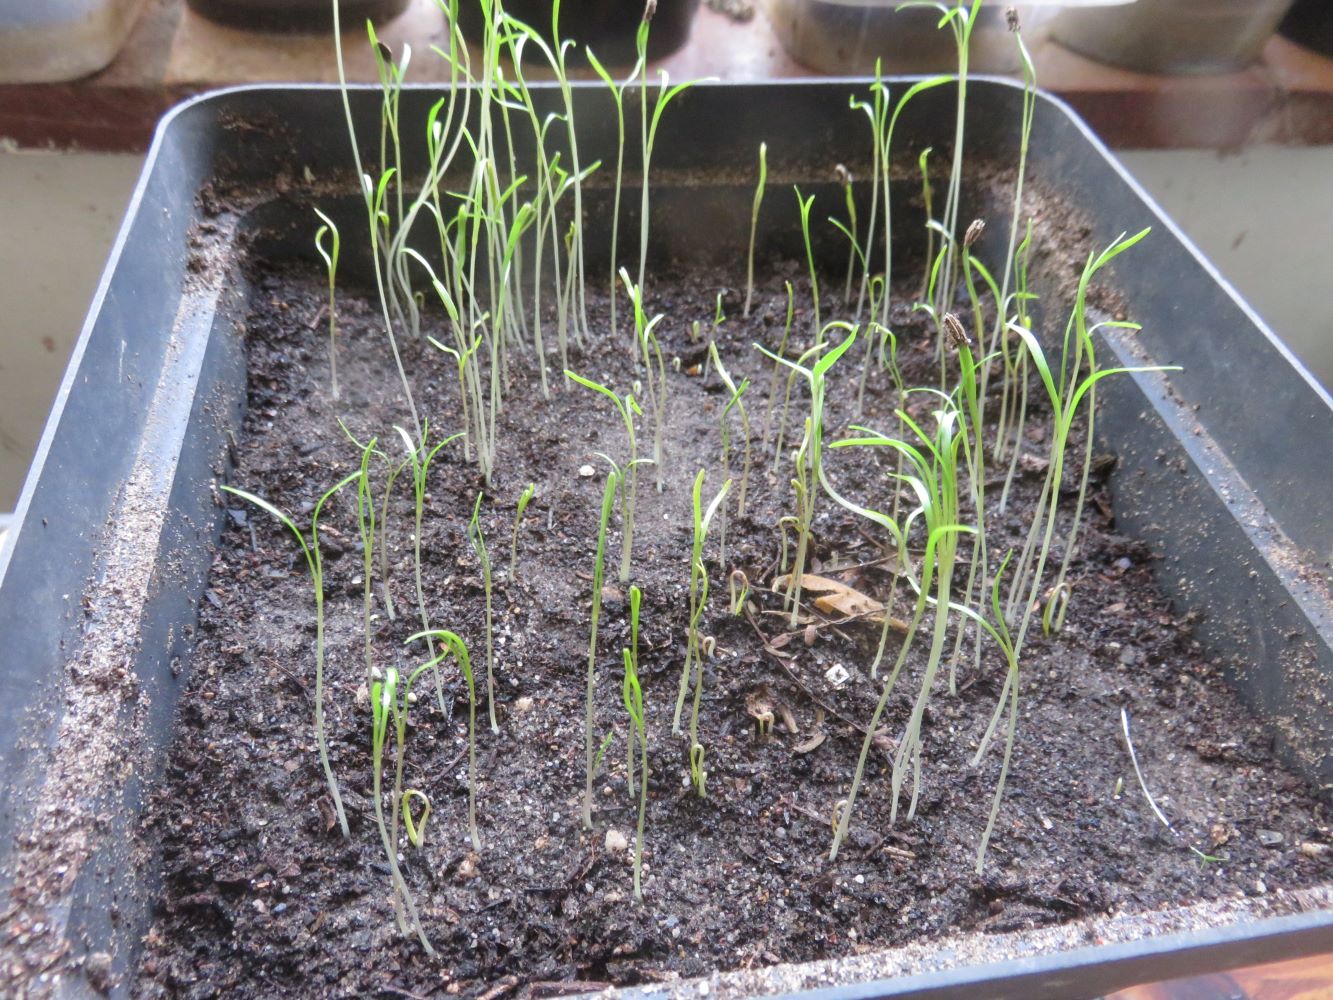 Germination is rapid and these seeds were used fresh and very viable.